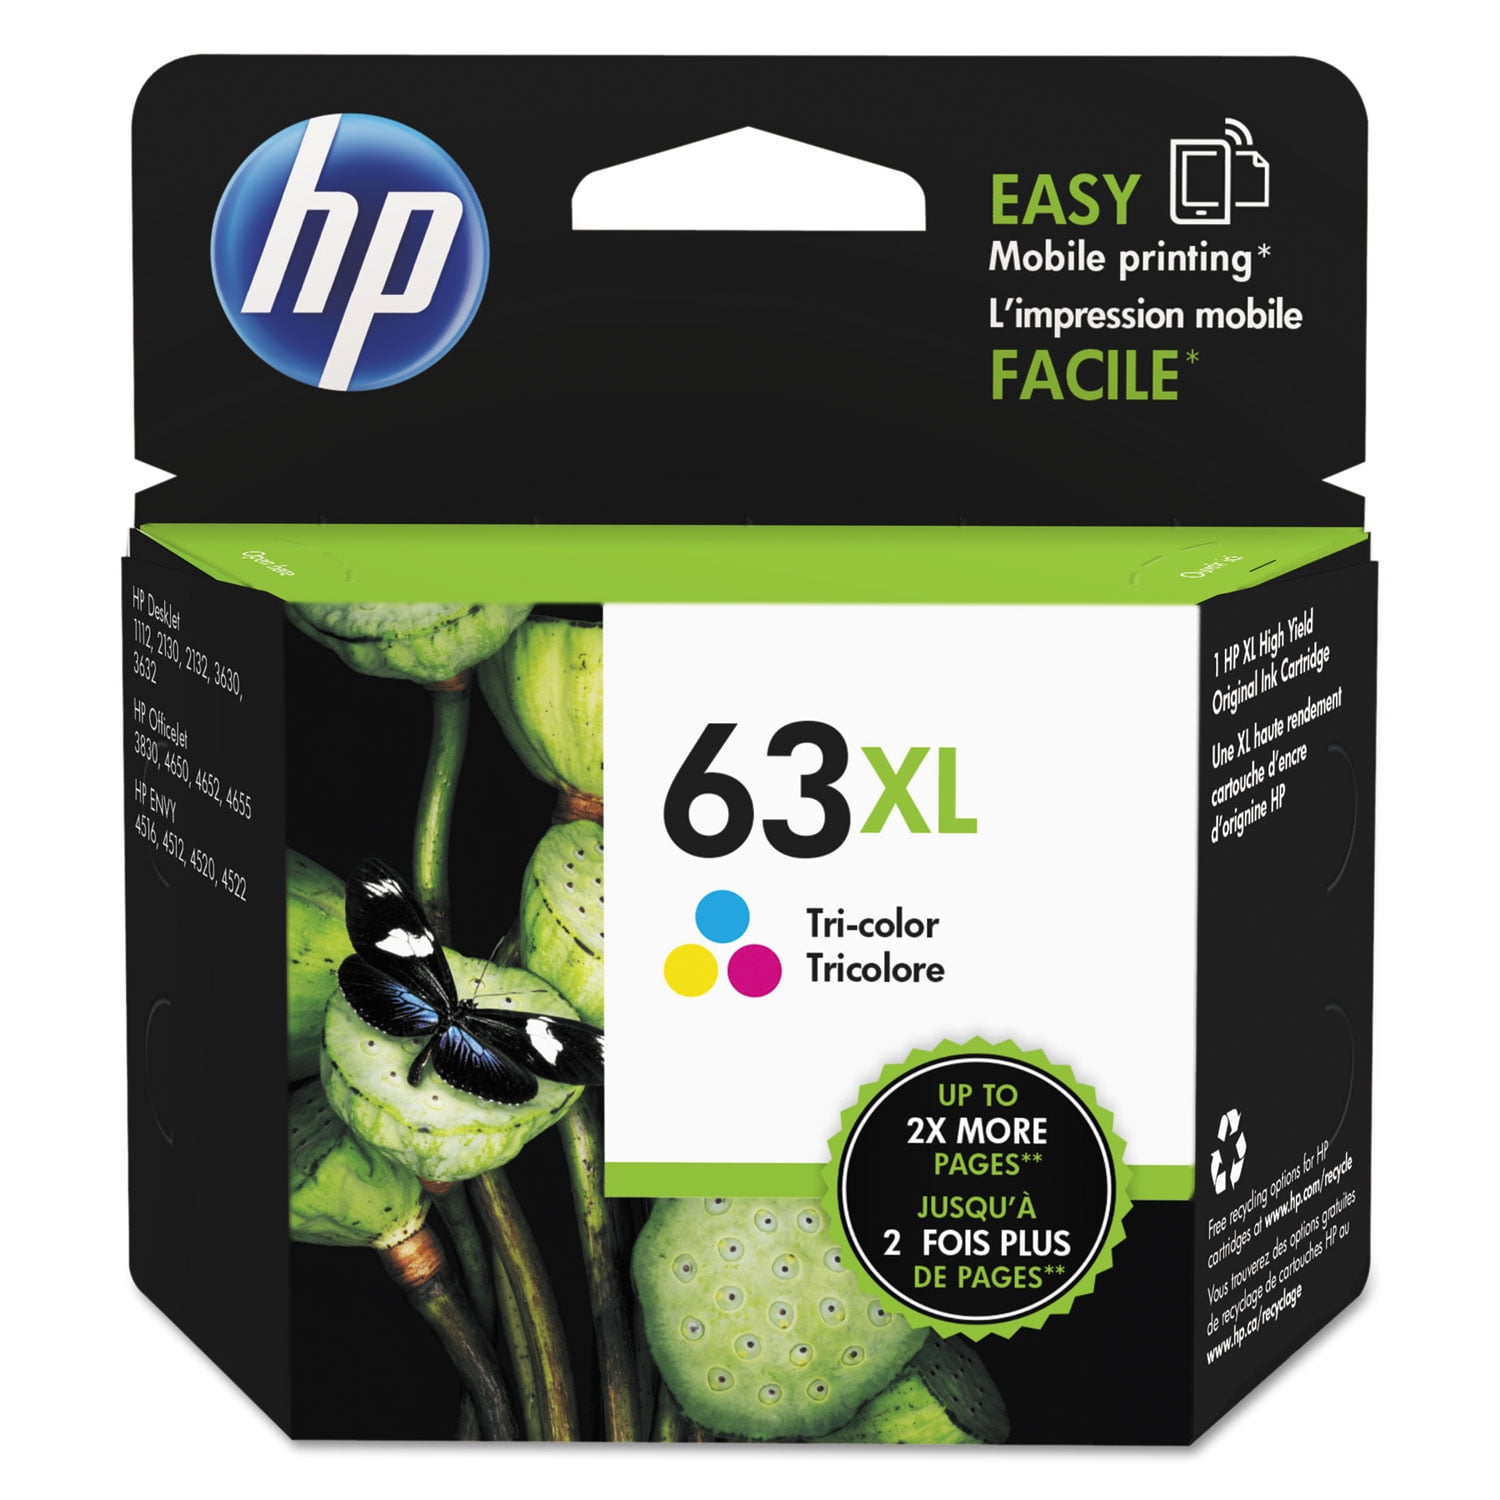 Work with HP Envy 4520 4516 Officejet 4650 3830 3831 4655 Deskjet 2130 2132 1112 3630 3633 OfficeWorld Remanufactured 63 63XL Ink Cartridge Replacement for HP 63XL 63 XL Ink Cartridge Black + Color 